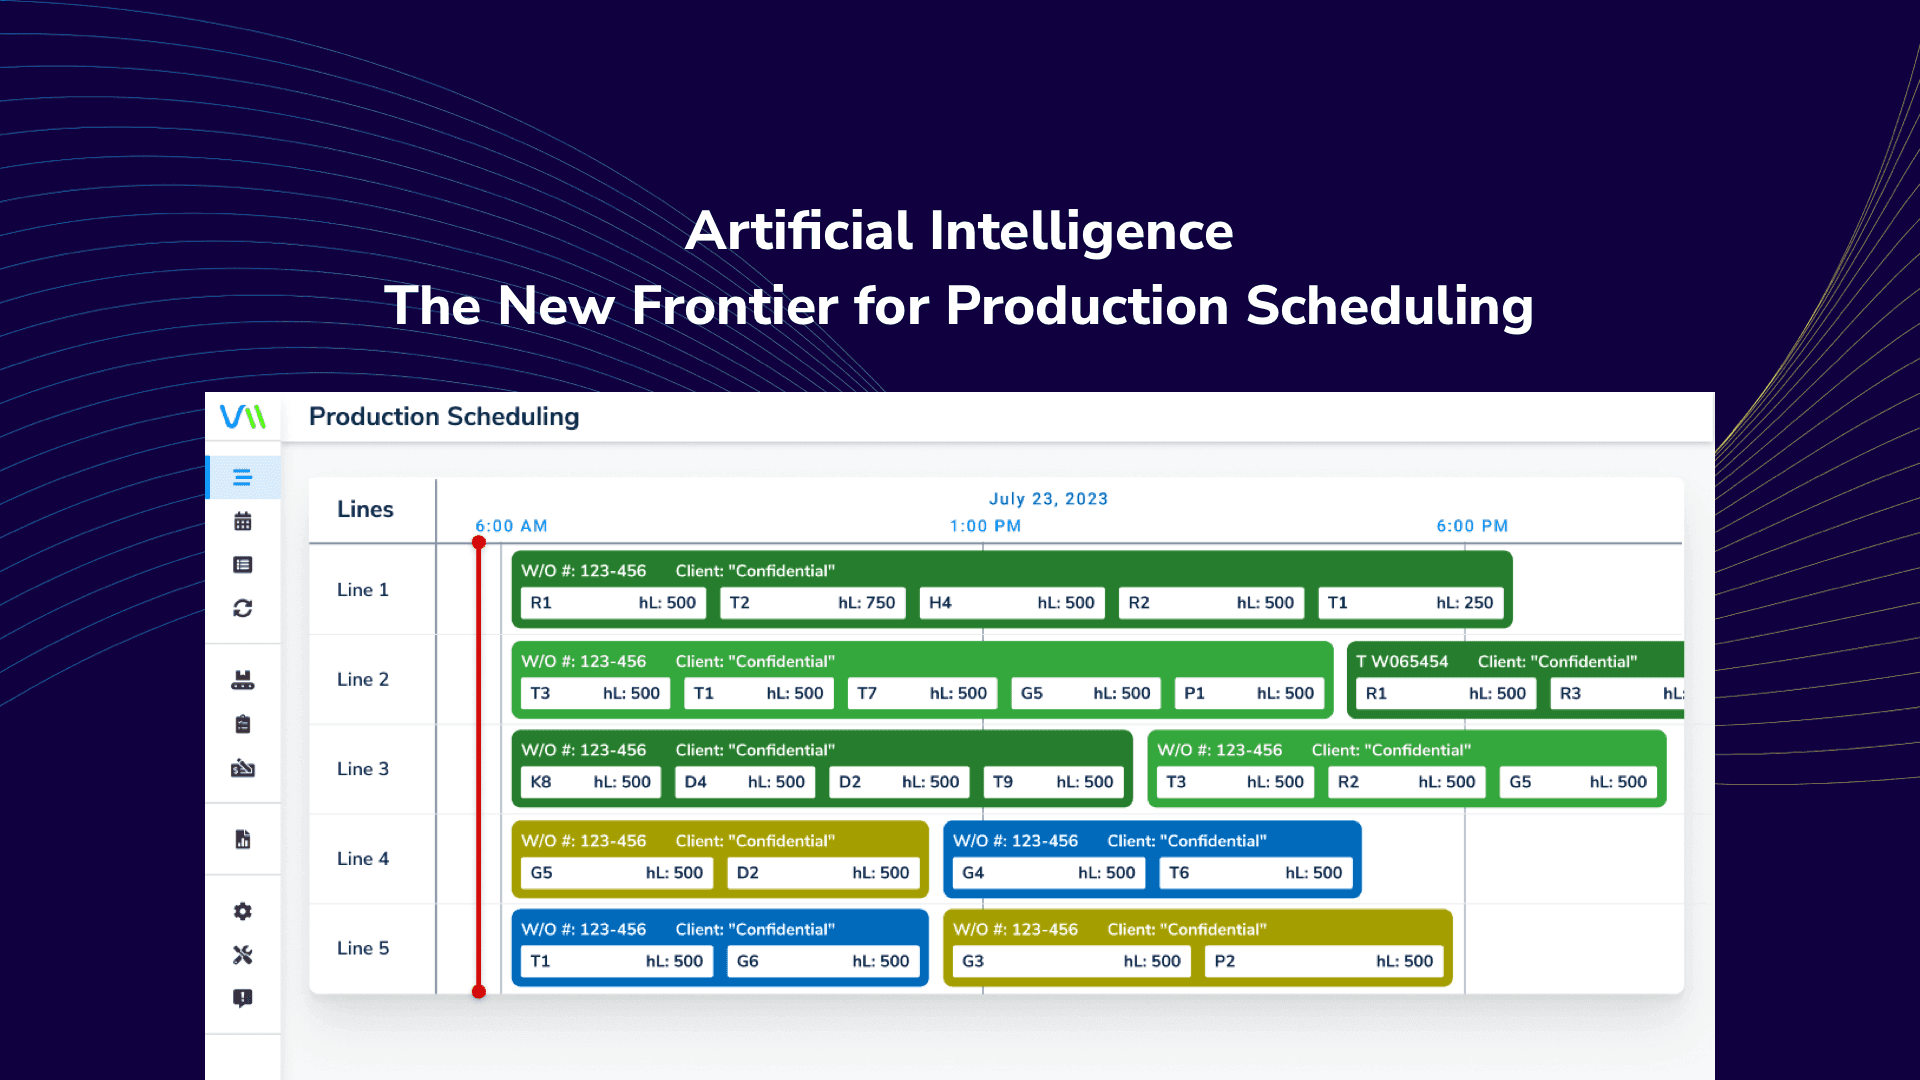 Artificial Intelligence, The New Frontier for Production Scheduling.